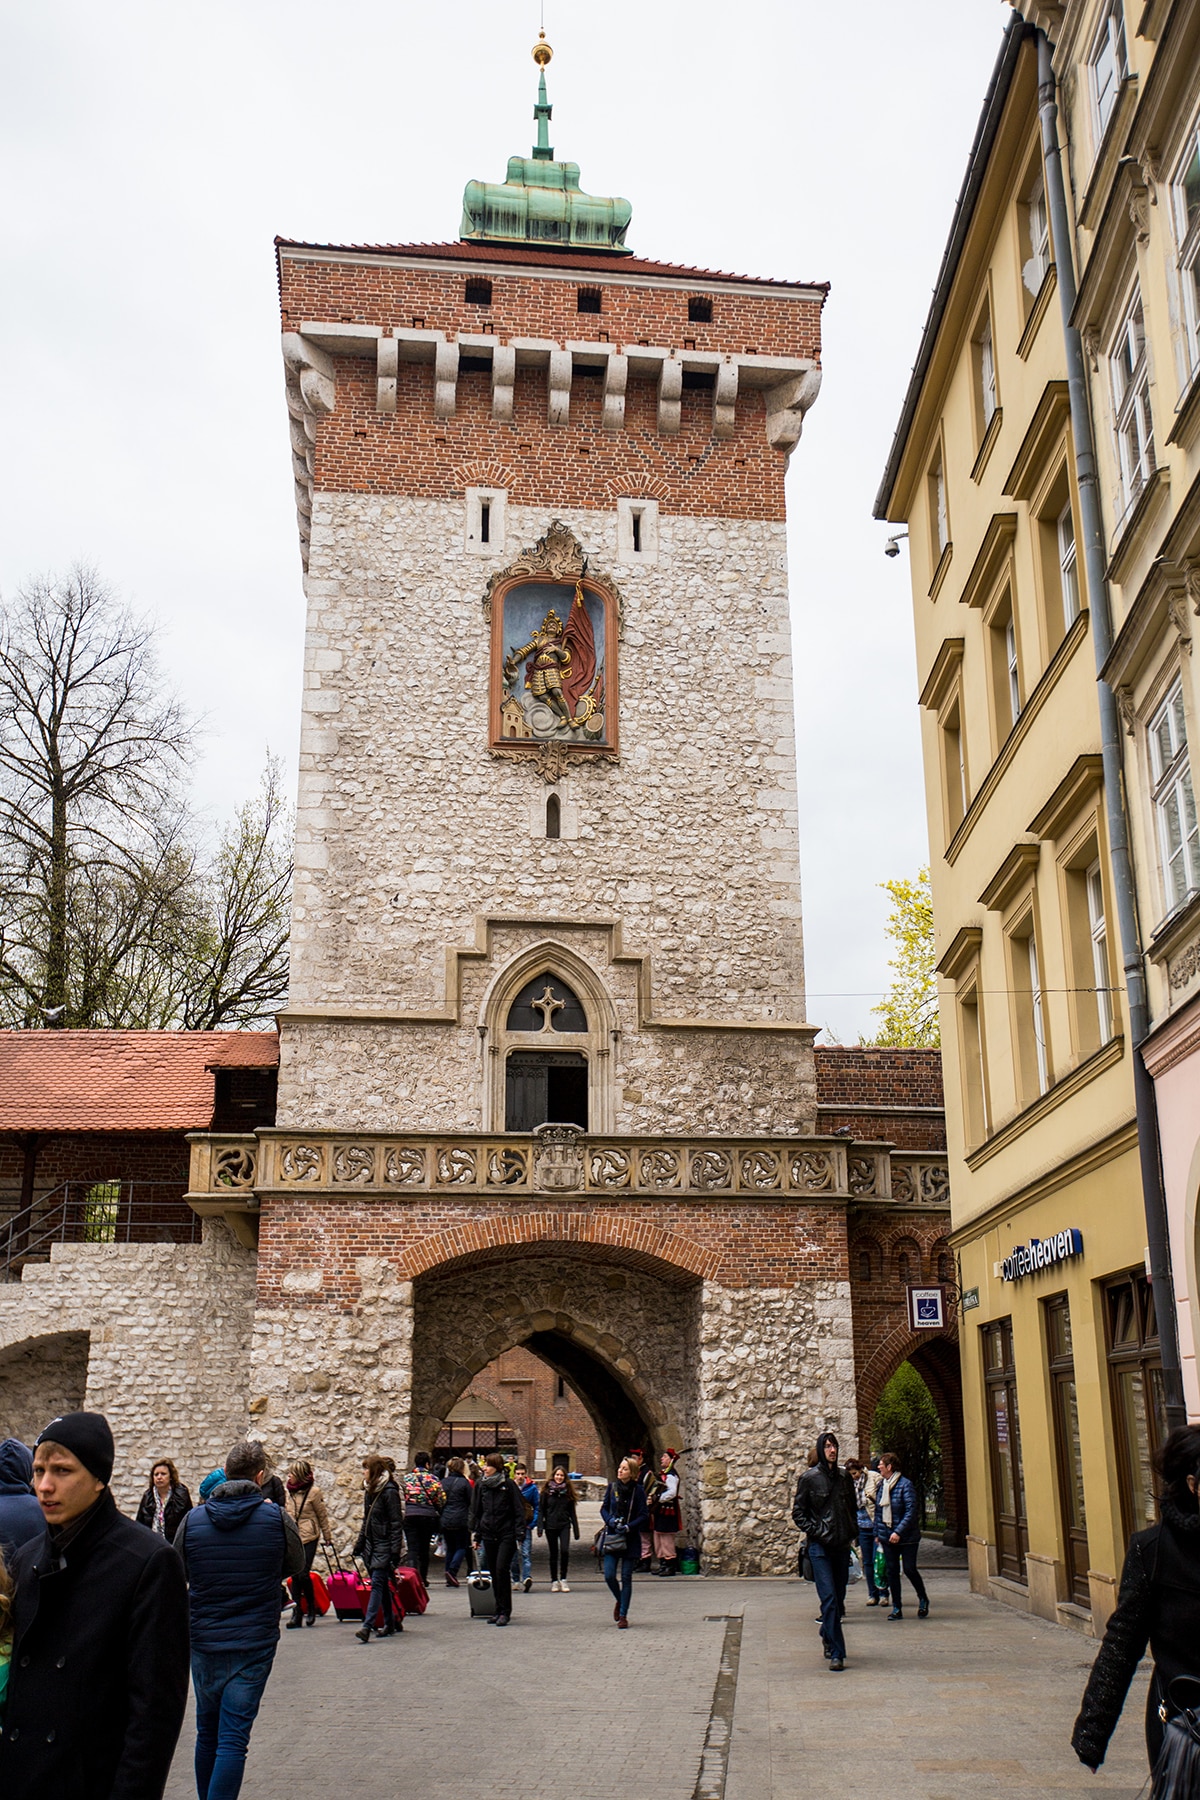 Old city wall, Krakow- so cool!